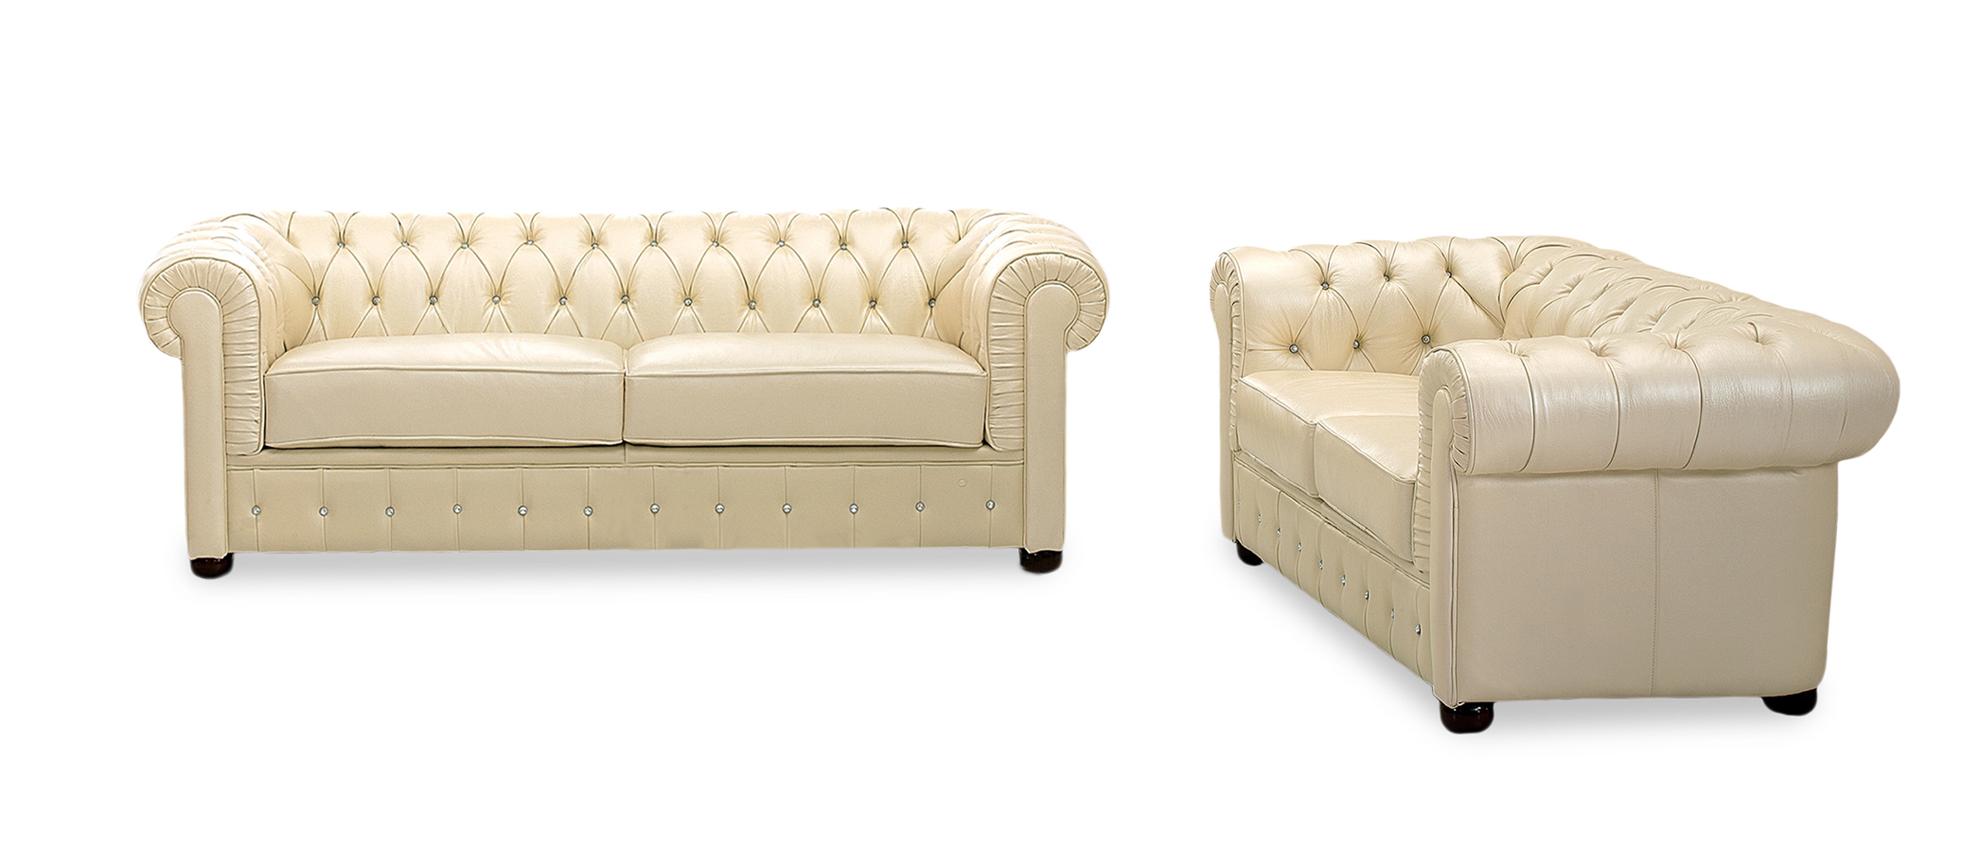 Contemporary Sofa and Loveseat Set 258 ESF 258-2PC in Ivory Leather